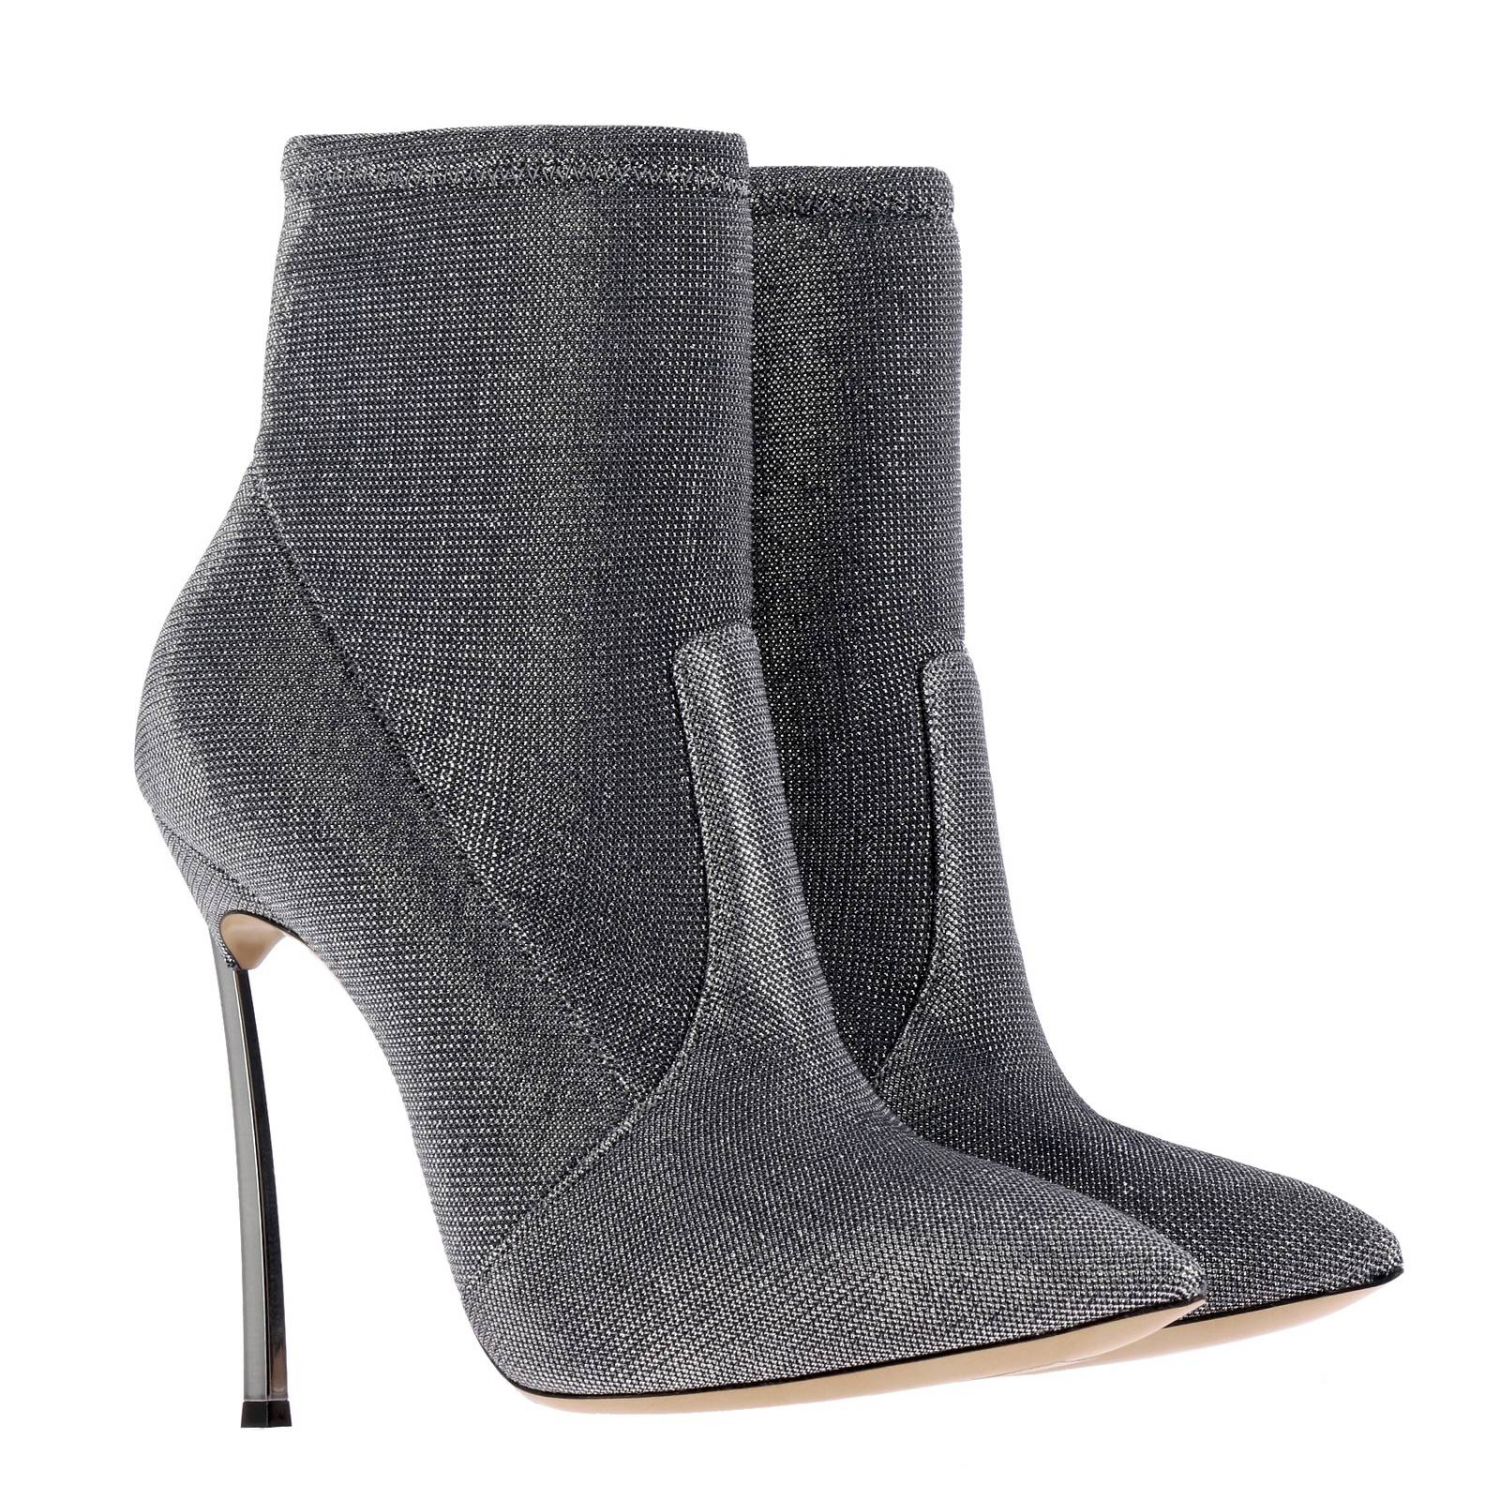 Casadei Outlet: Shoes women - Silver | Heeled Booties Casadei ...